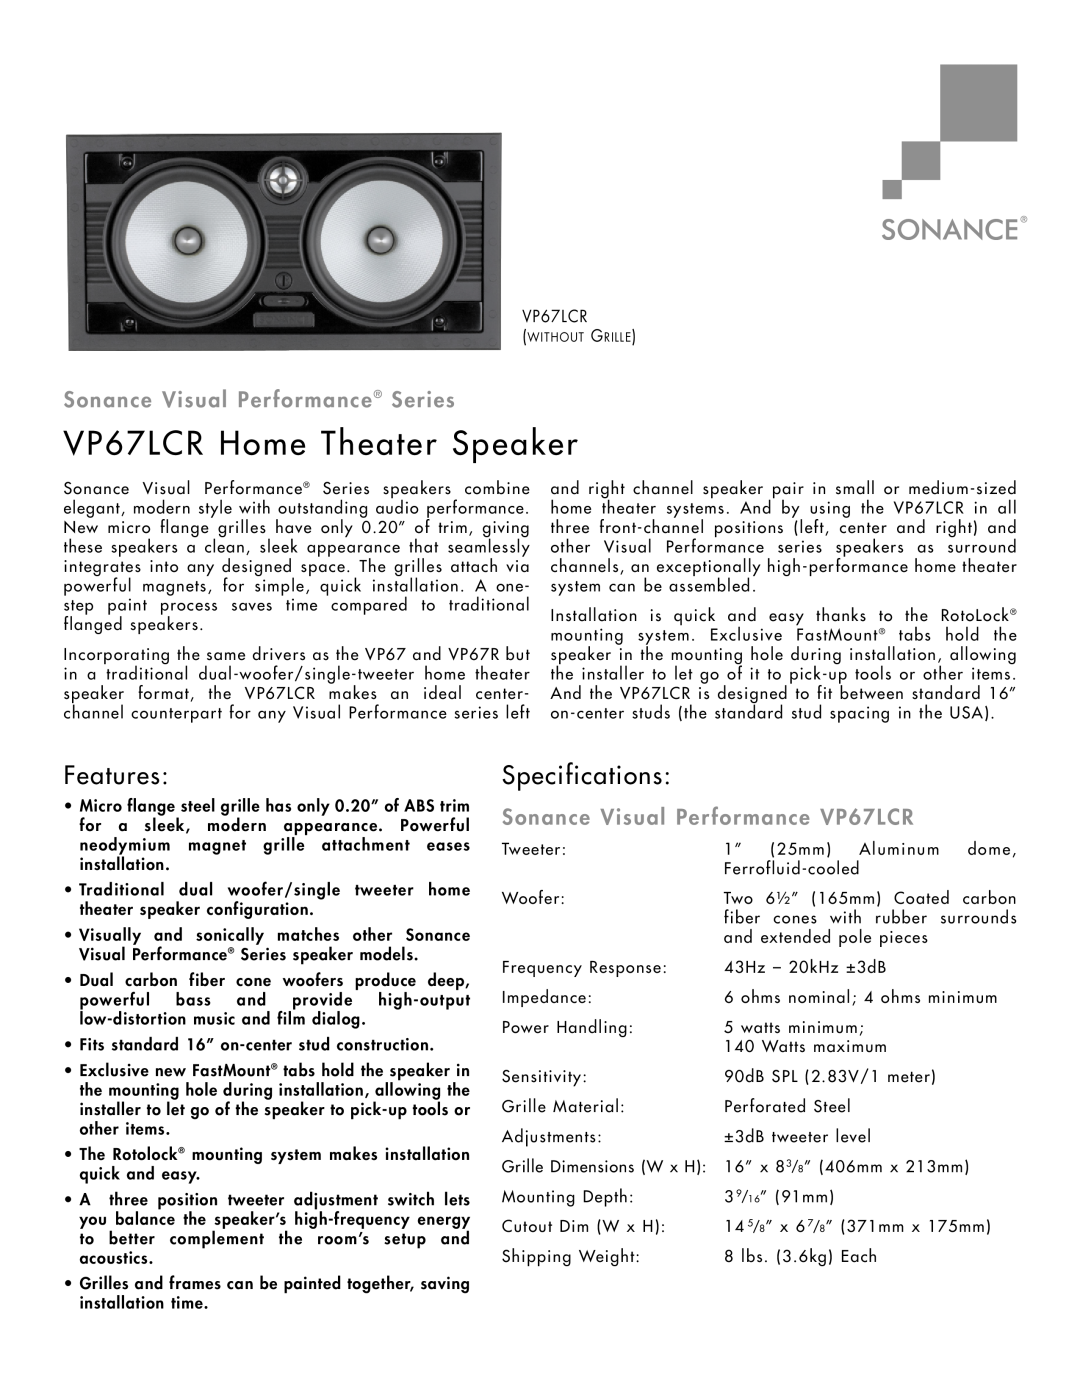 Sonance VP67 LCR specifications VP67LCR Home Theater Speaker, Features, Specifications, Sonance Visual Performance Series 